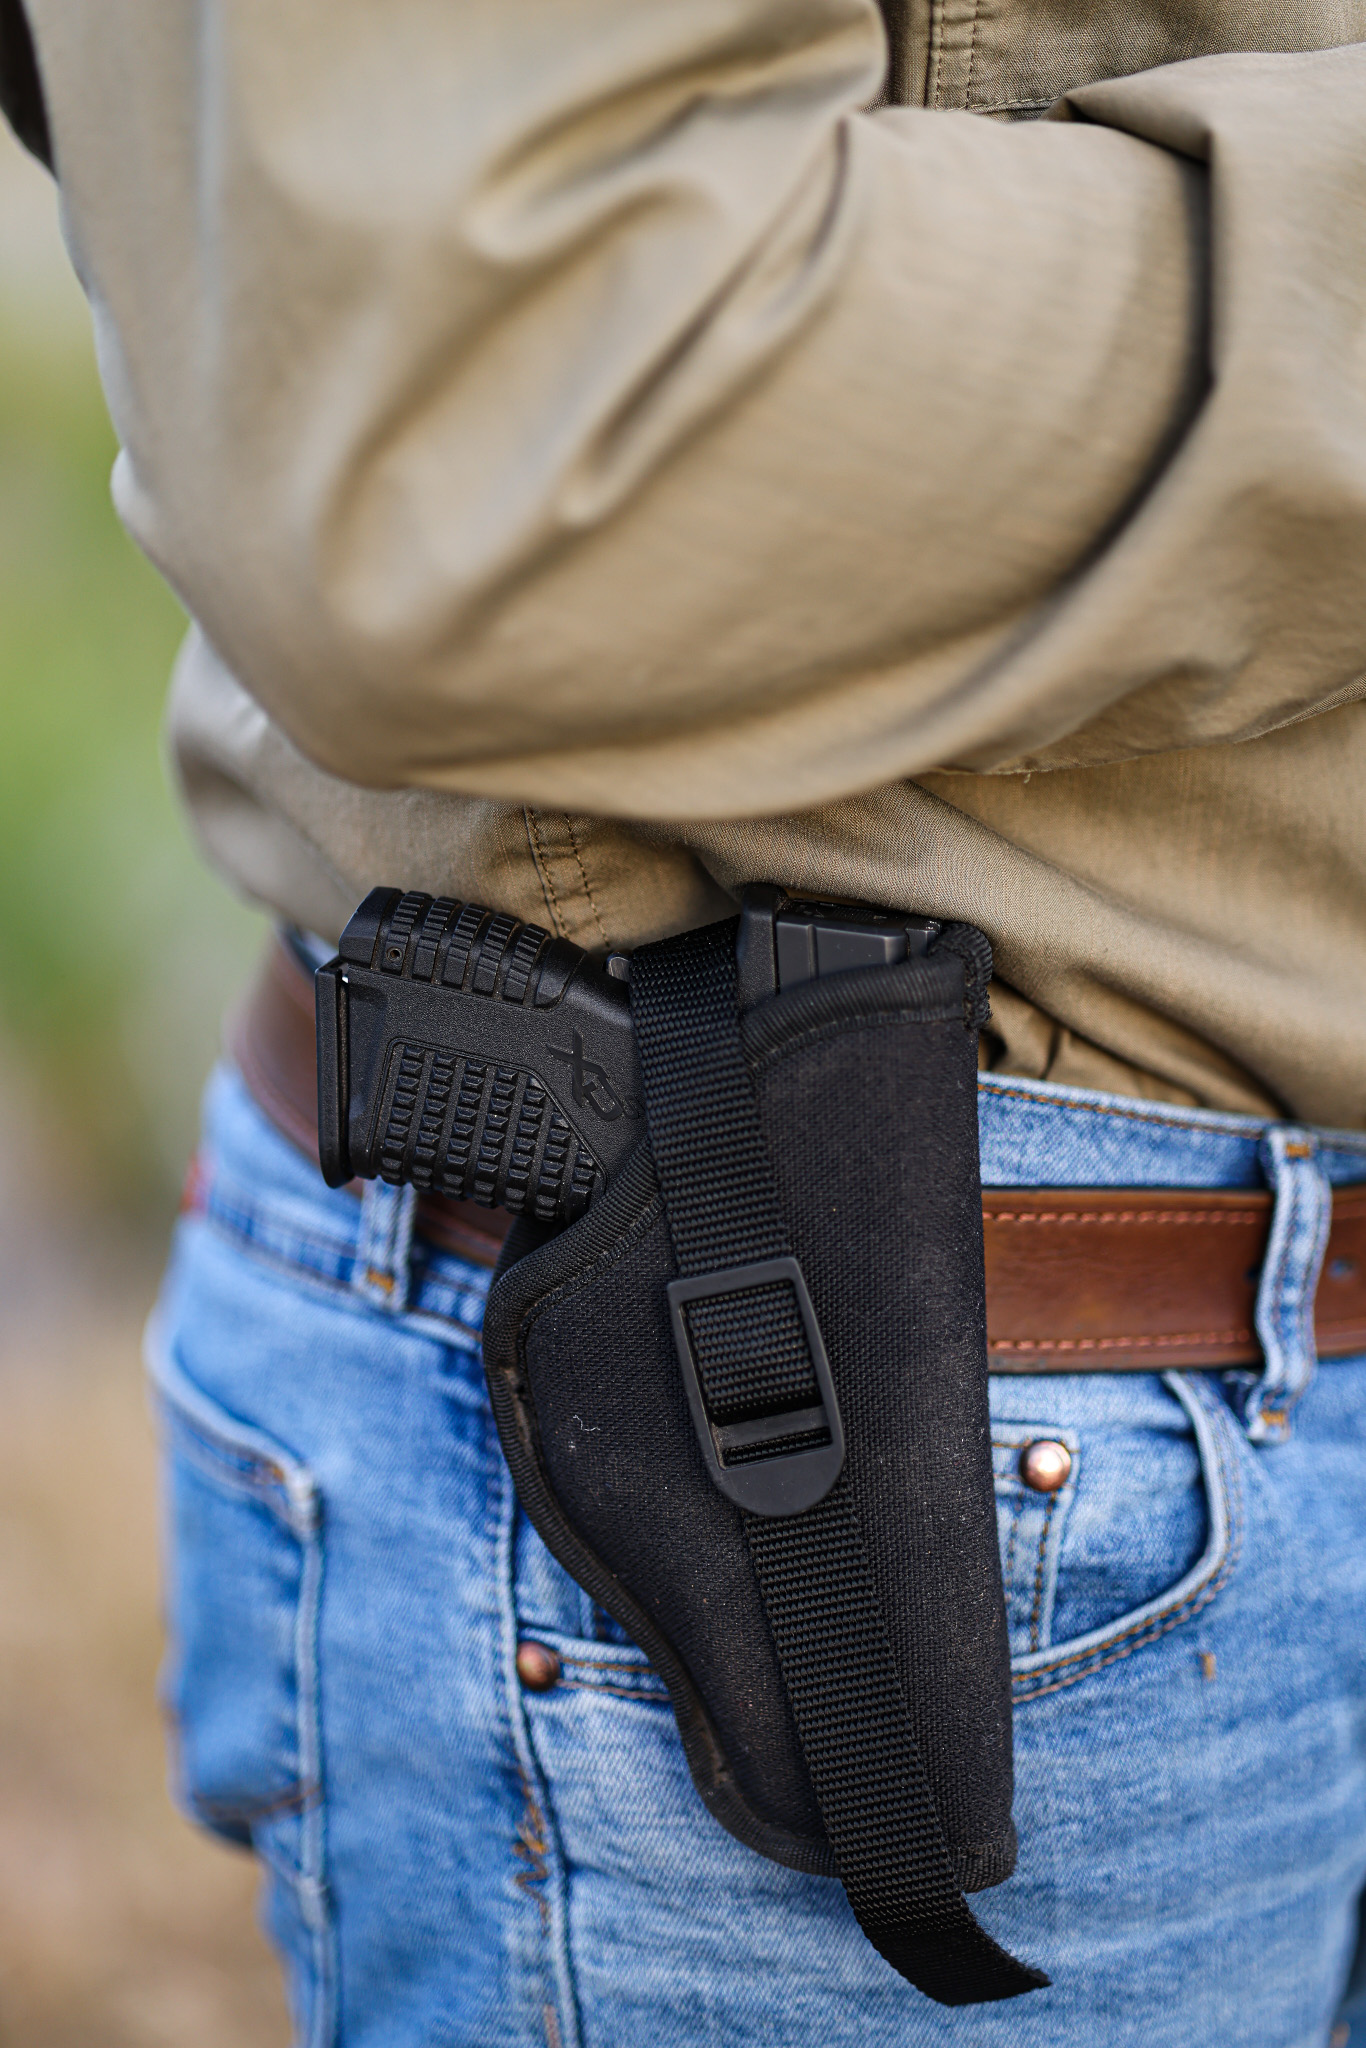 The XDS provides piece of mind.